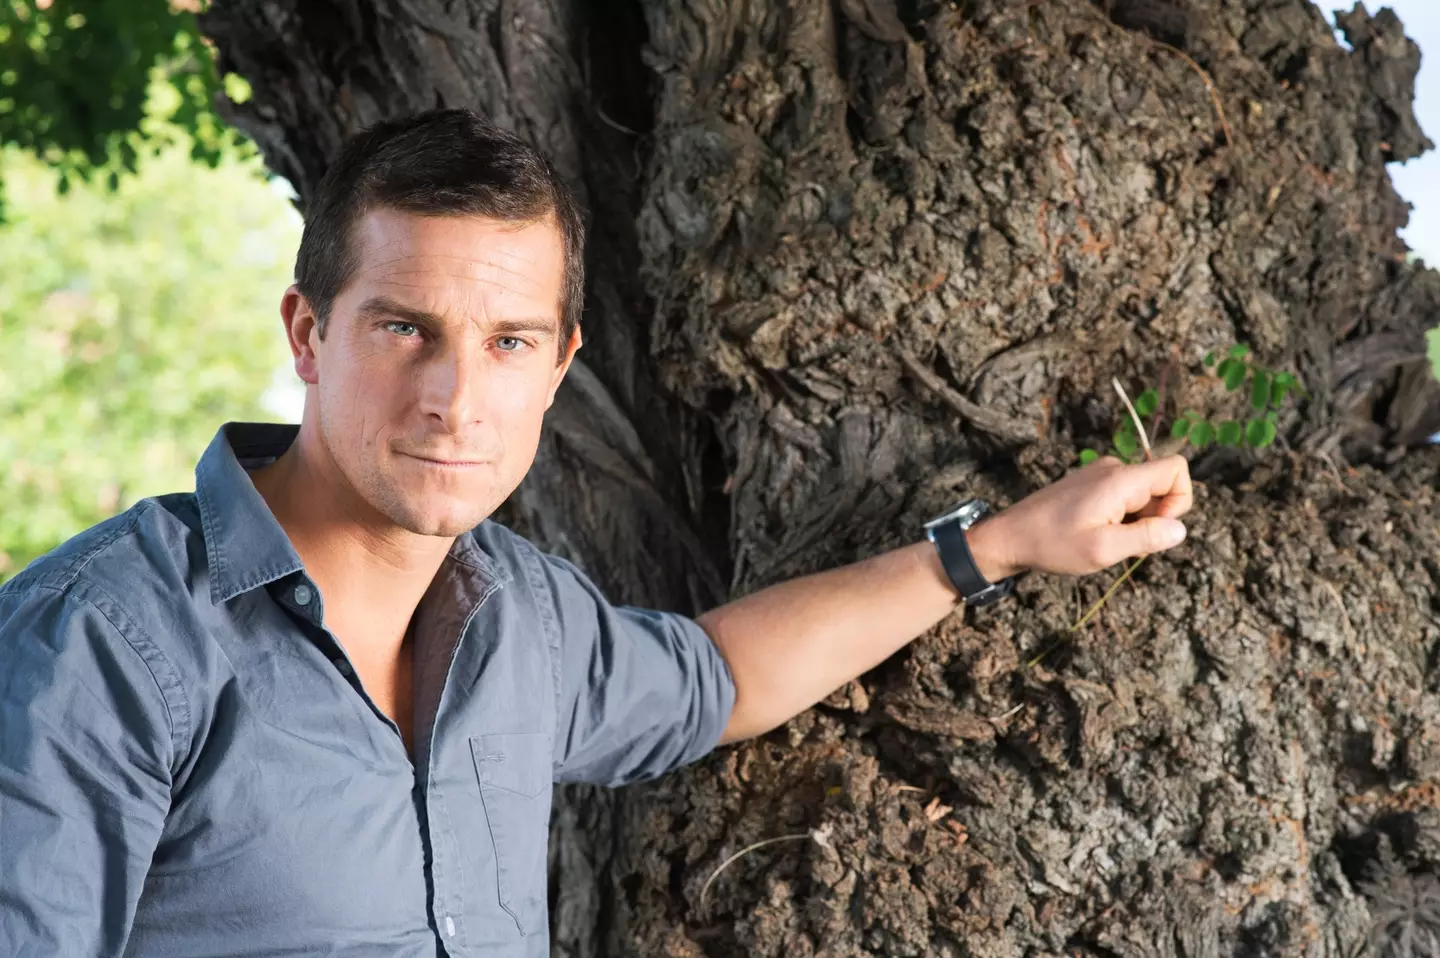 Grylls also recommends a cold shower to get you up and in a positive headspace in the mornings.